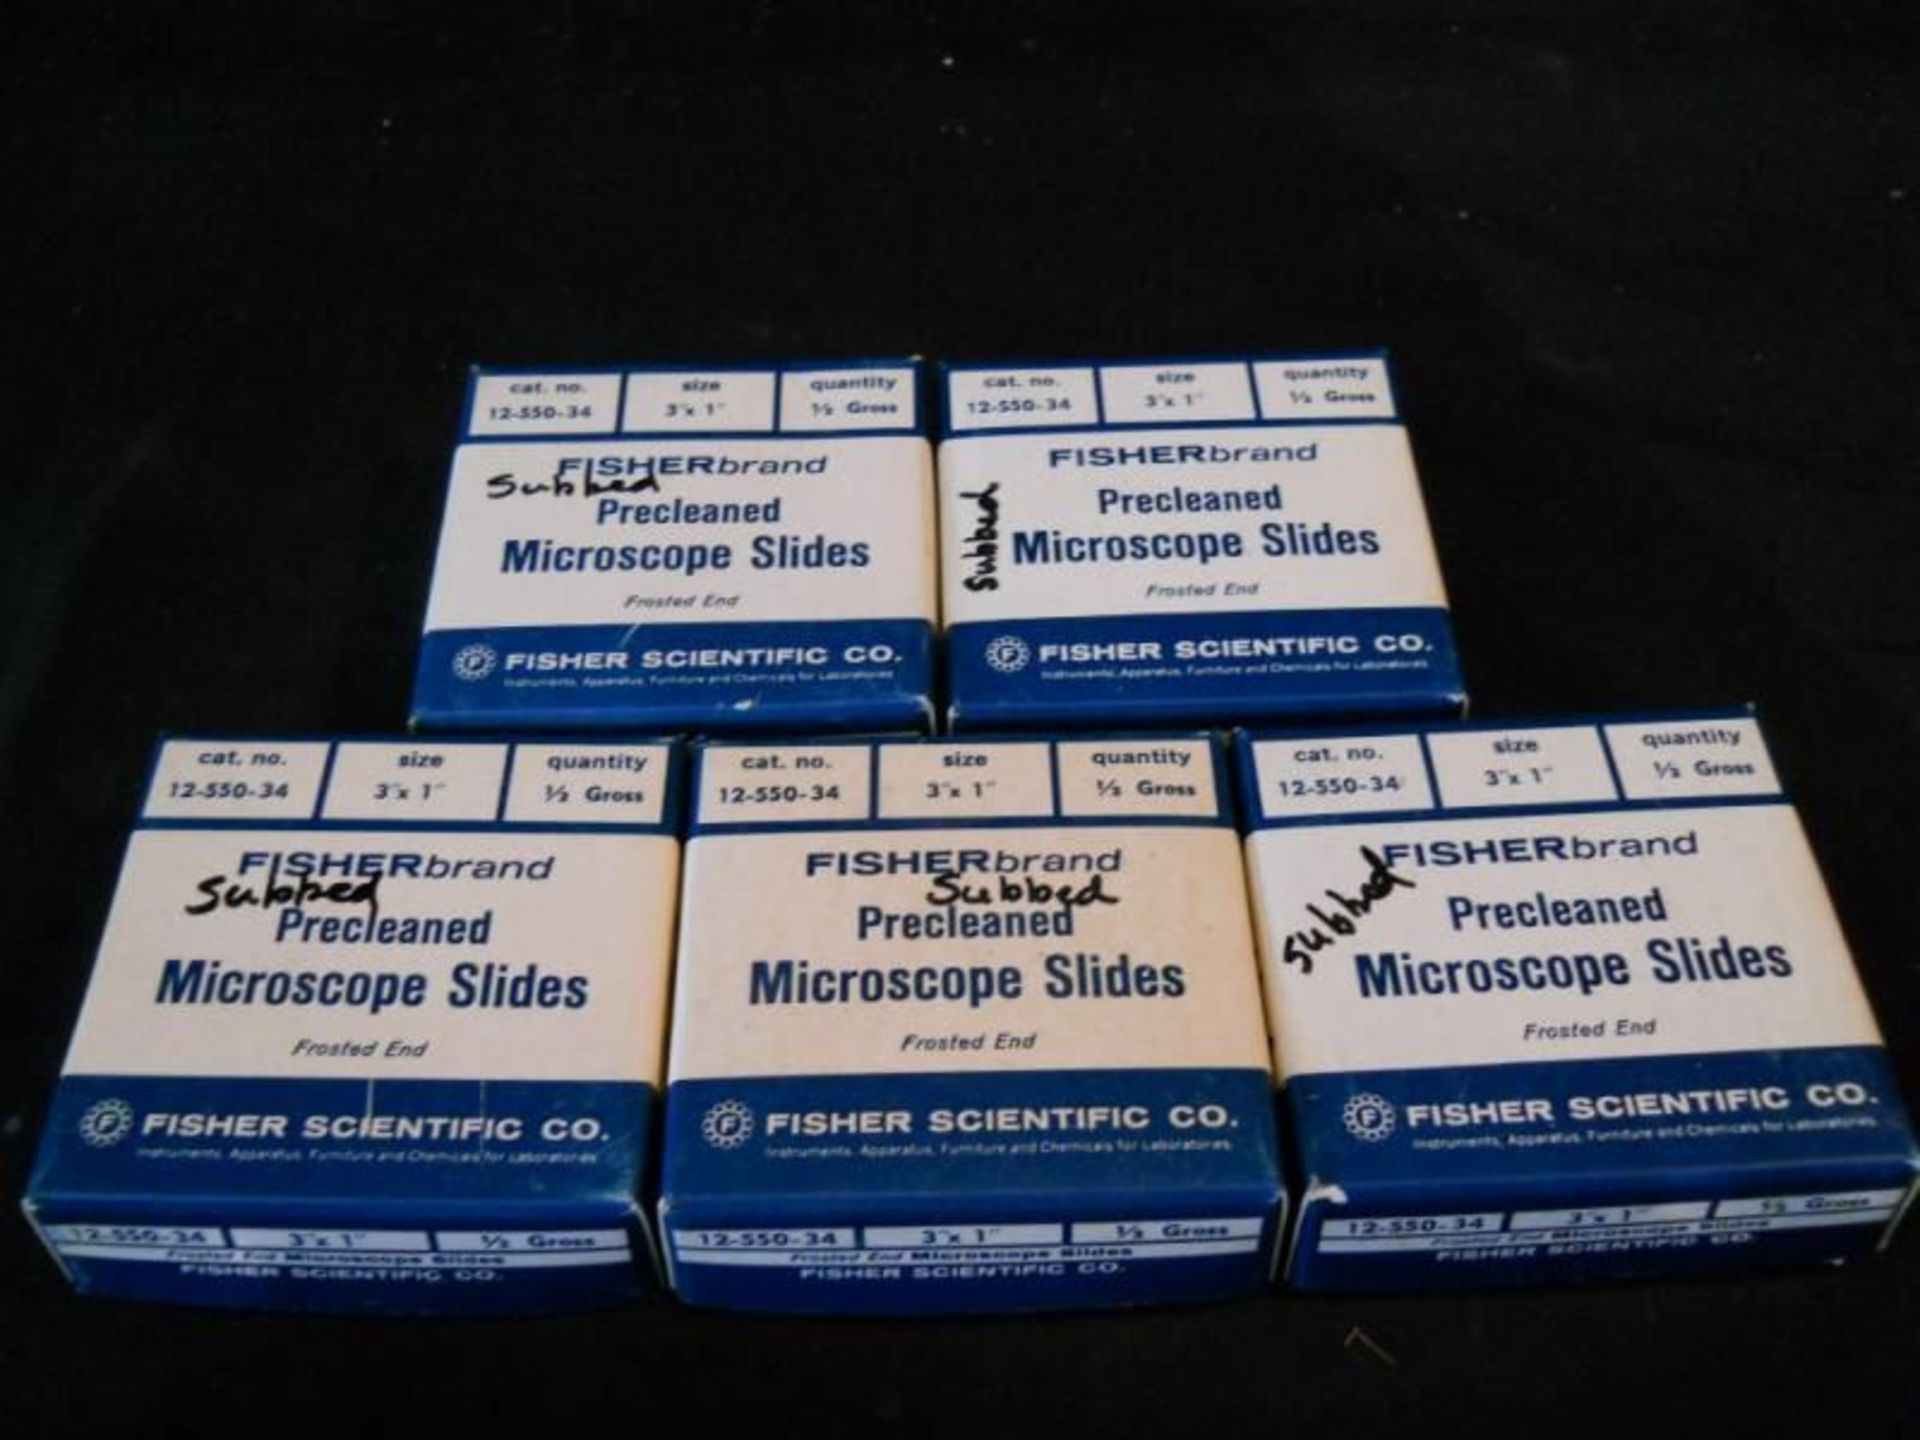 Lot of FisherBrand Frosted End Microscope Slides 3" x 1" 12-550-34 (1255034), Qty 1, 330988256616